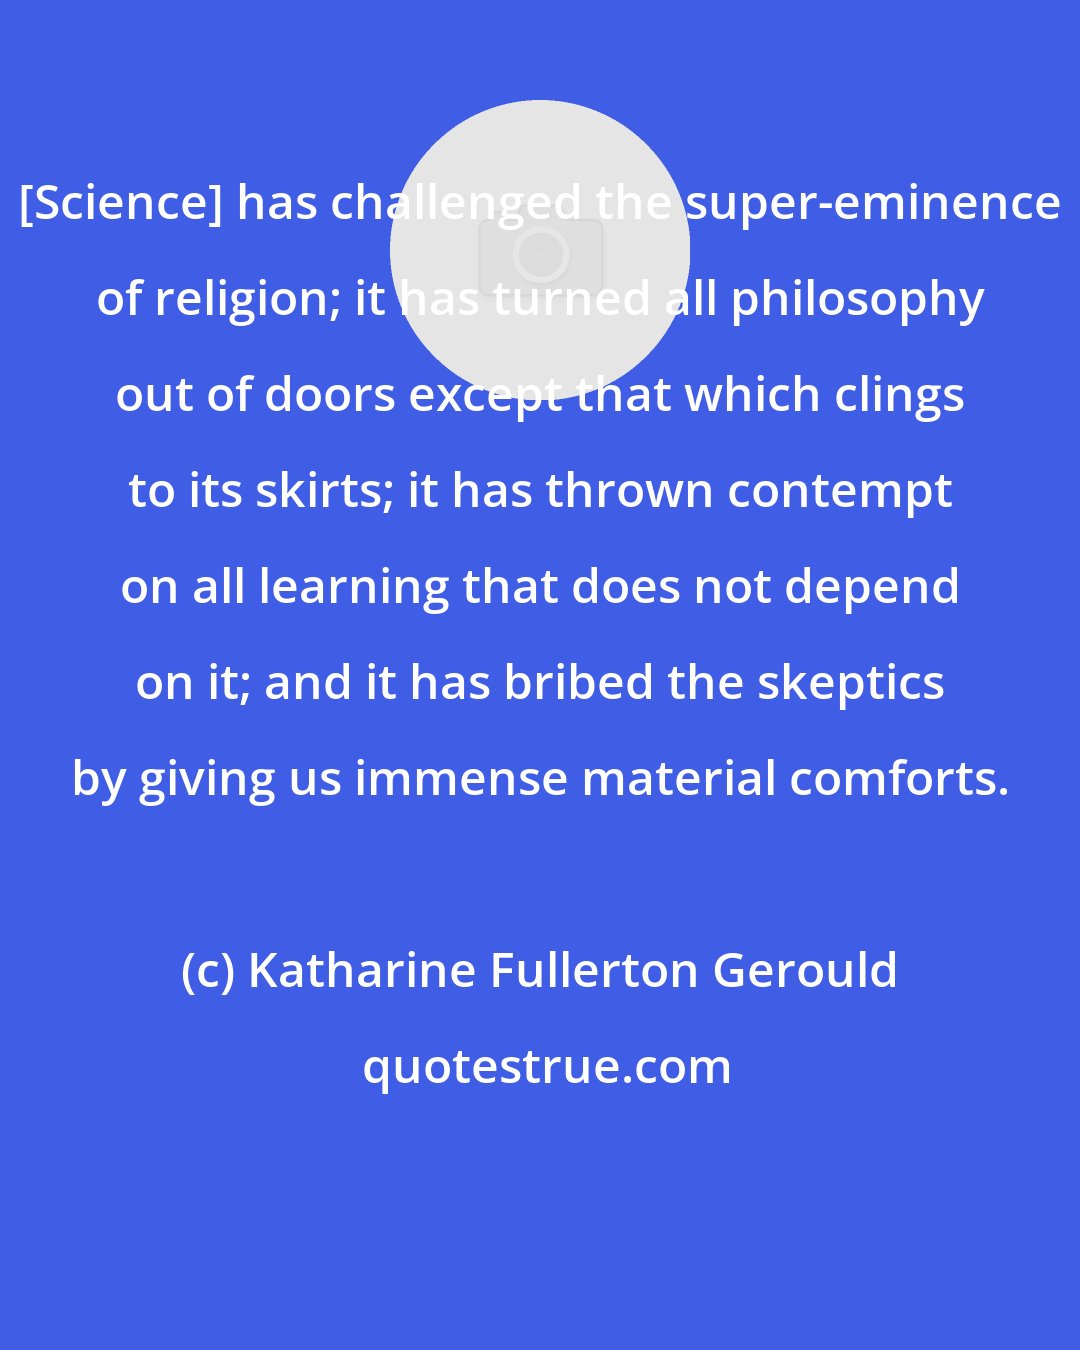 Katharine Fullerton Gerould: [Science] has challenged the super-eminence of religion; it has turned all philosophy out of doors except that which clings to its skirts; it has thrown contempt on all learning that does not depend on it; and it has bribed the skeptics by giving us immense material comforts.